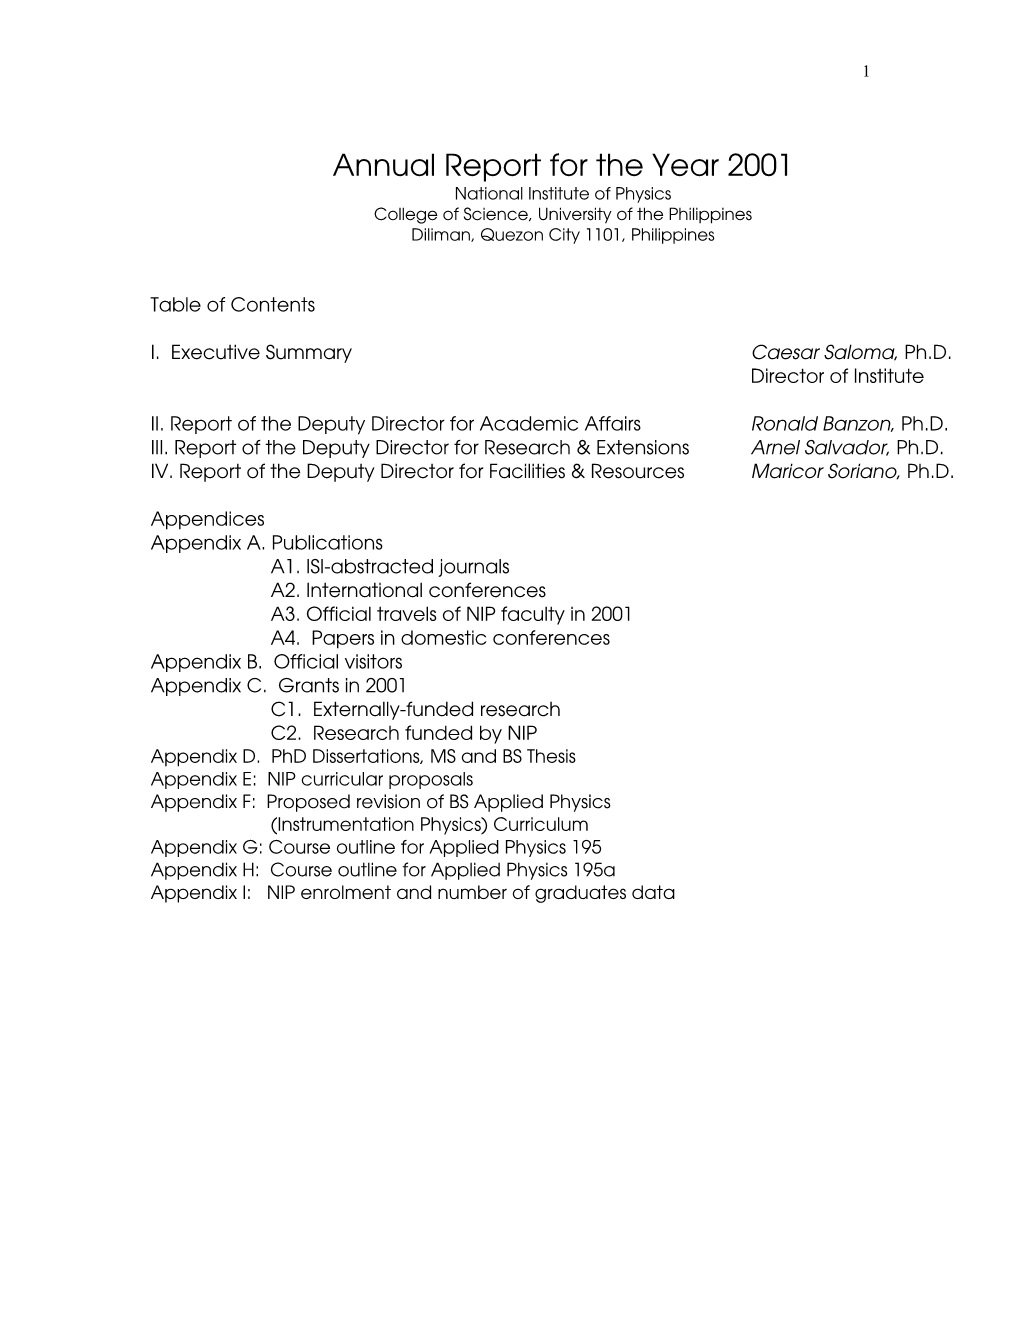 Annual Report for the Year 2001 National Institute of Physics College of Science, University of the Philippines Diliman, Quezon City 1101, Philippines